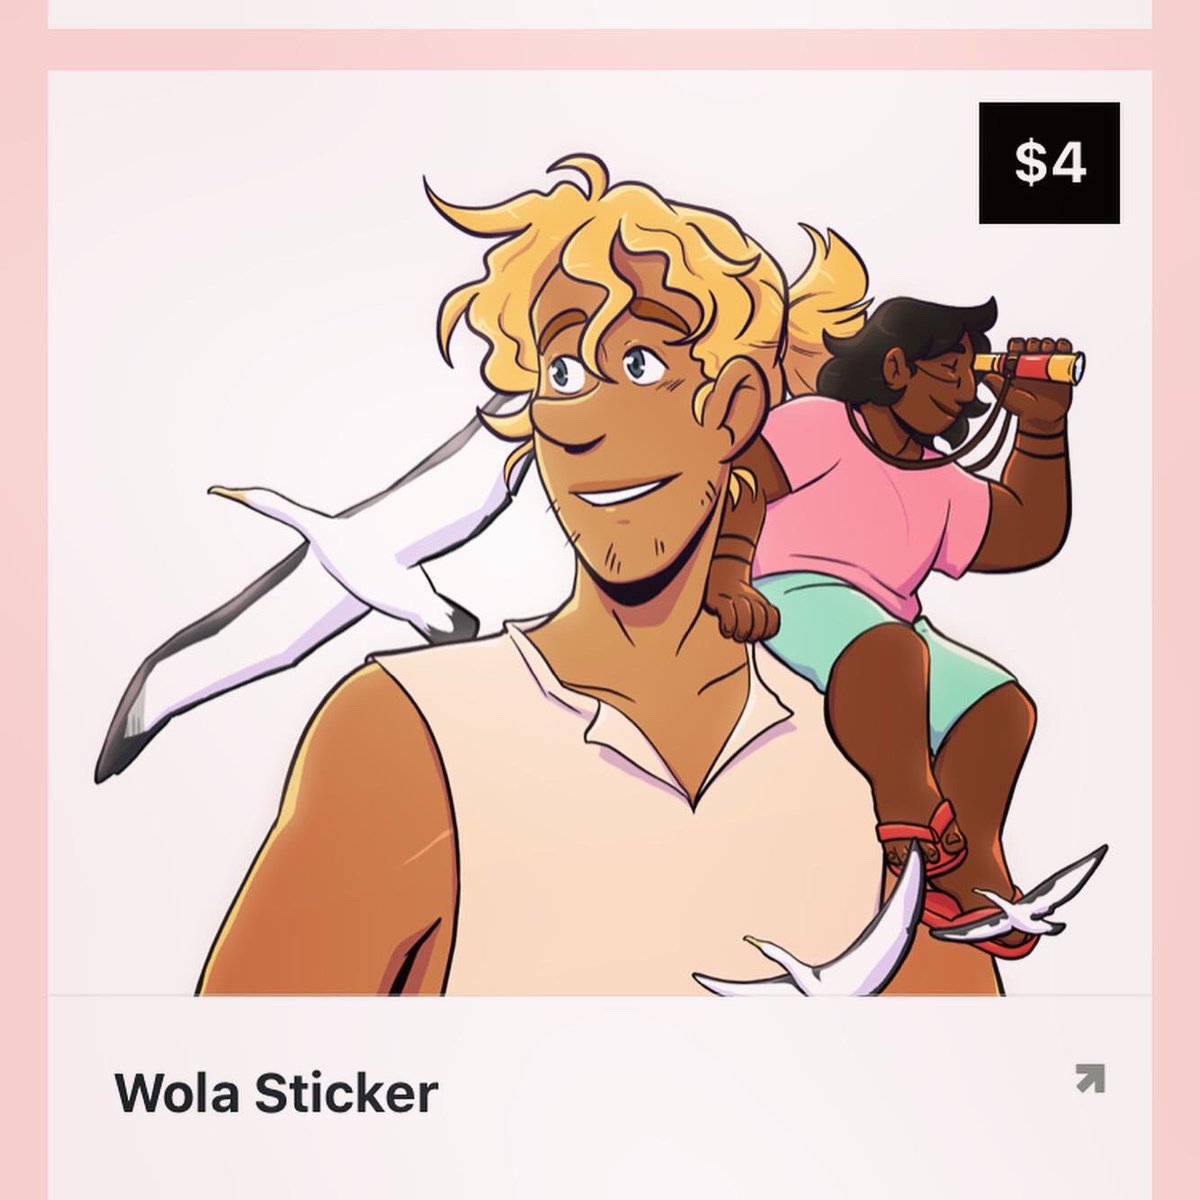 I’m also selling stickers, postcards, and the PDF of my graphic novel through gumroad! International shipping is available for stickers and postcards. Check it out here:  https://gumroad.com/catuallieandkurzz